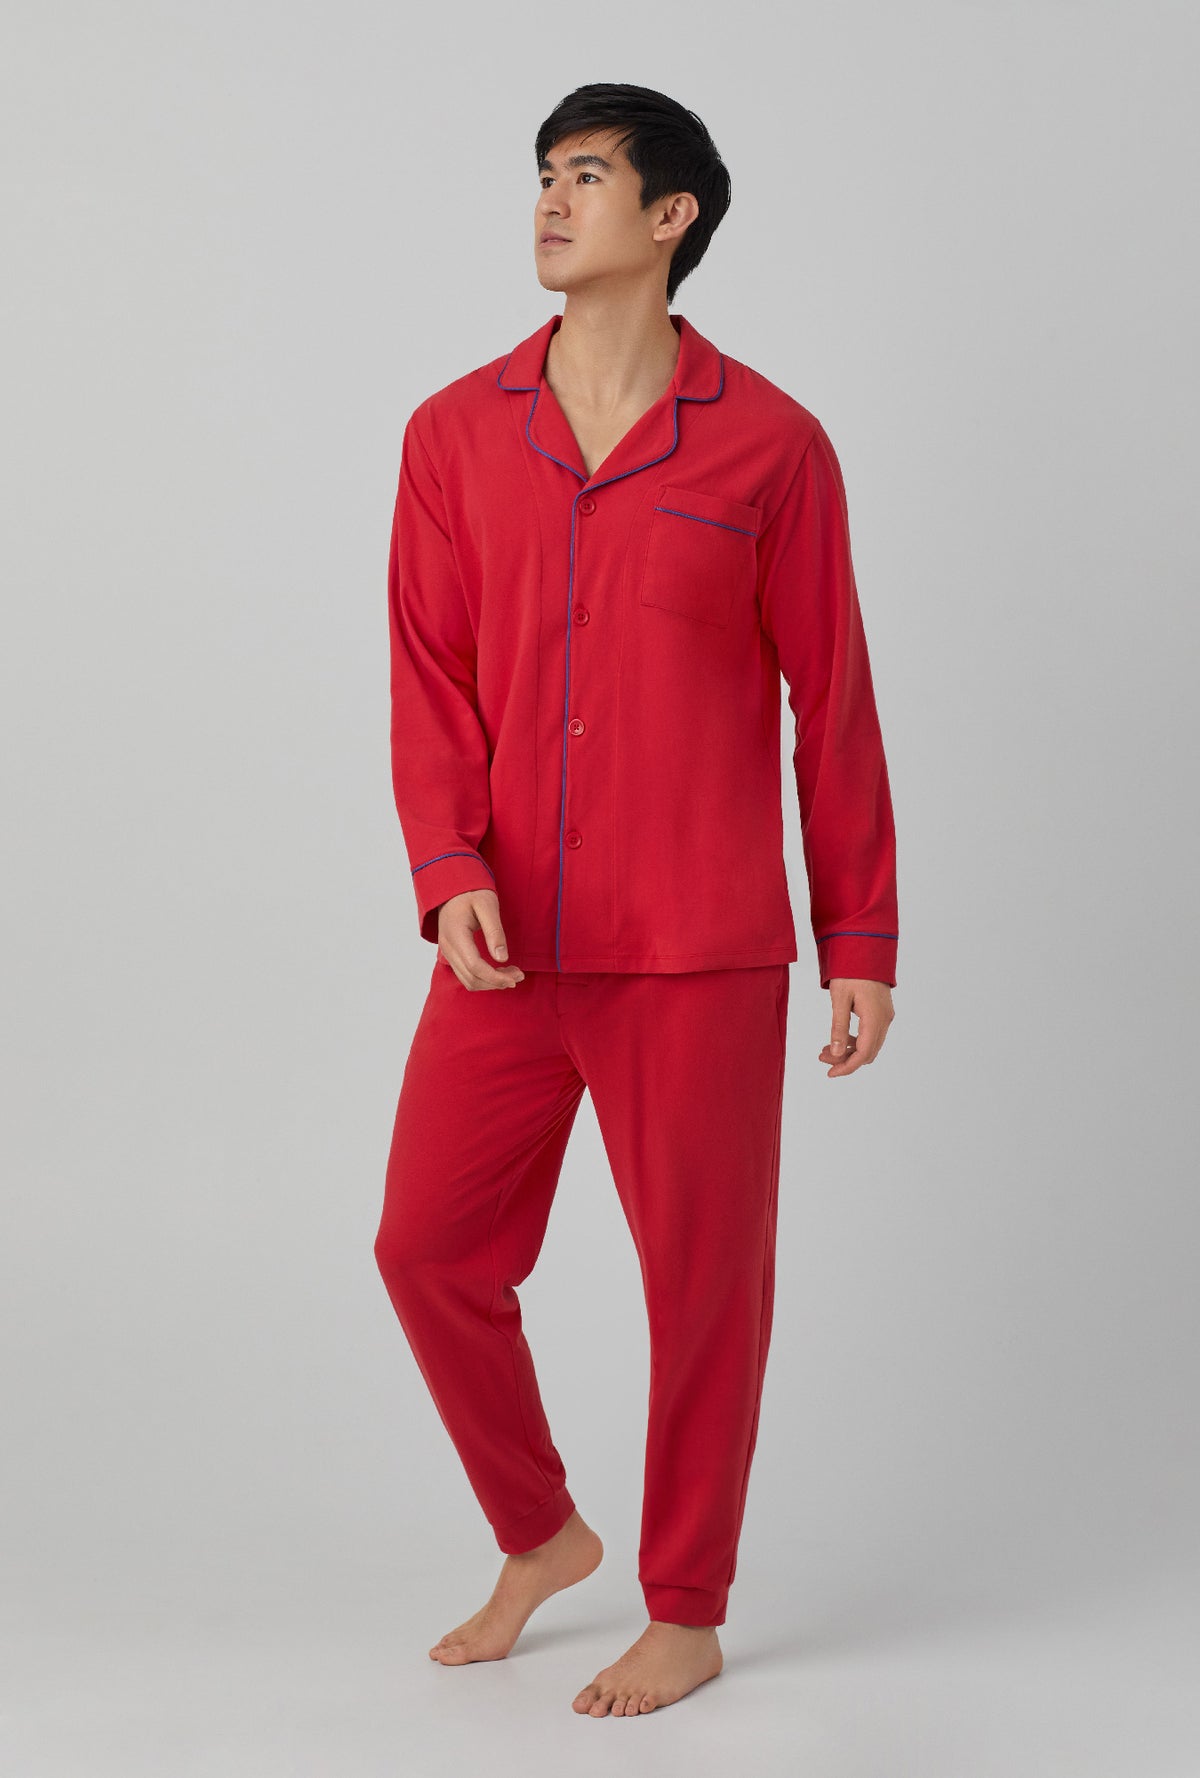 A men wearing red Long Sleeve and Jogger Stretch Jersey PJ Set with Samba Red print